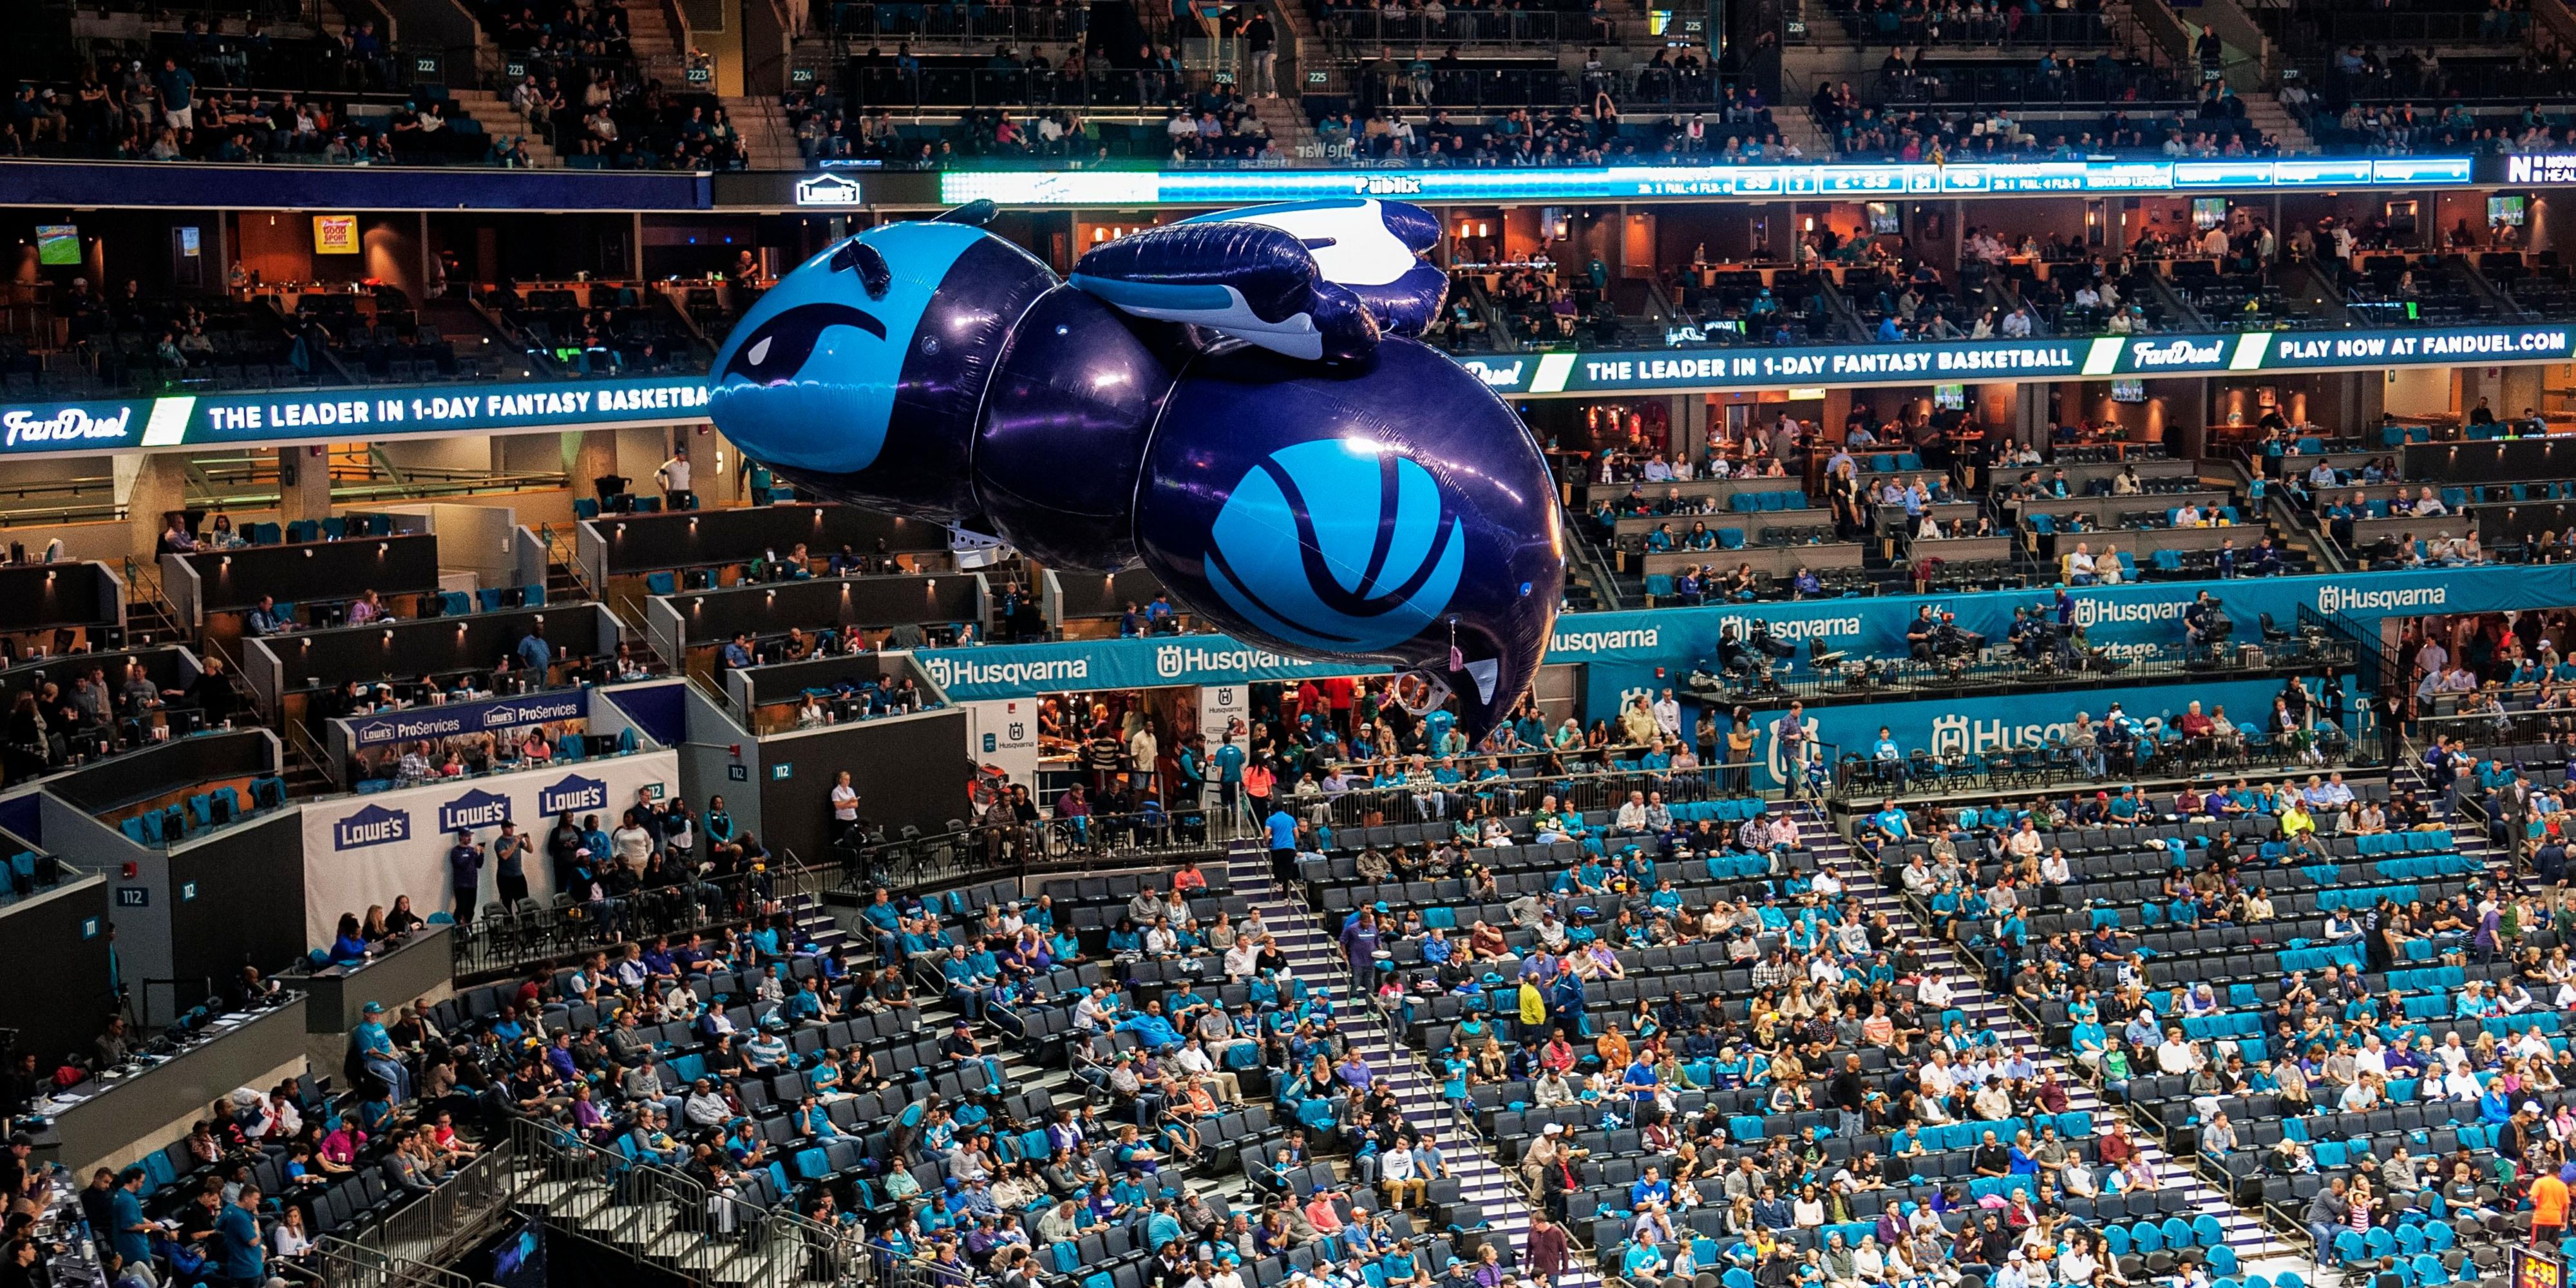 This stadium is home to both the Charlotte Hornets (basketball) and the Charlotte Checkers (hockey), plus it’s a stop for touring big name music acts. We are located less than 2 miles from the Spectrum Center.